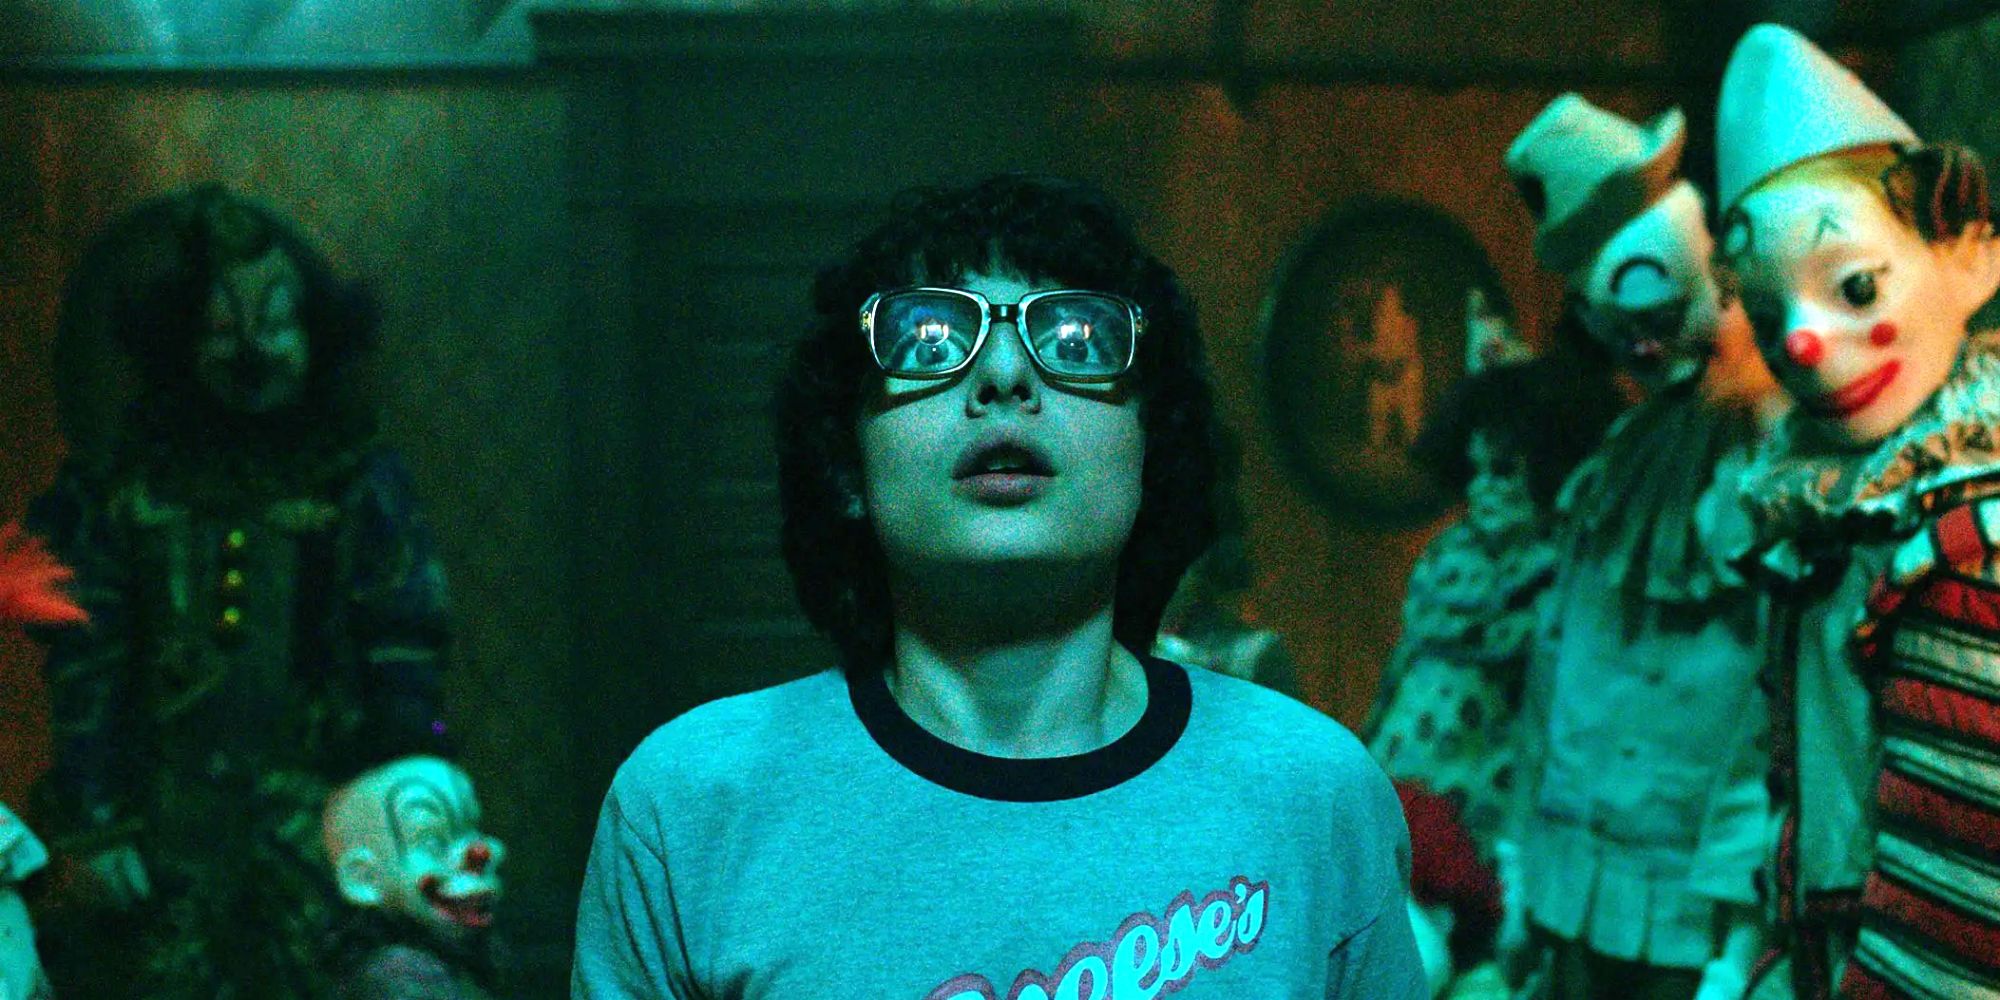 IT 2017 - Finn Wolfhard as Richie Tozier in the Clown Room